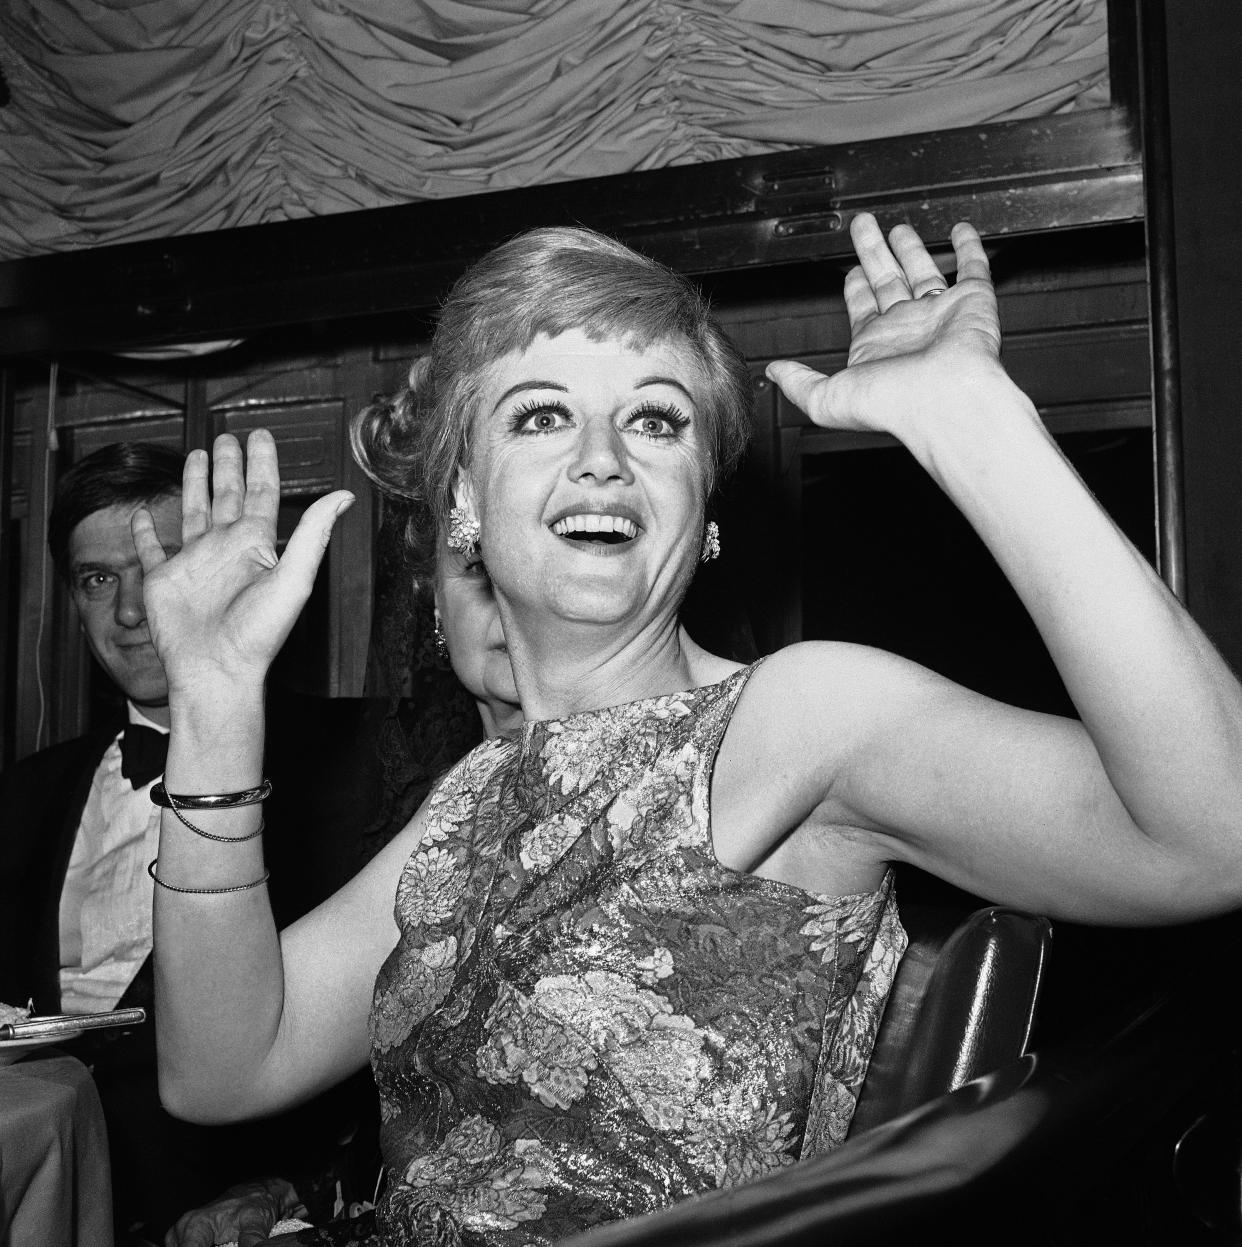 FILE - Angela Lansbury, the star of Broadway's newest musical "Mame," appears at a party following the opening of the show in New York, on May 24, 1966. Lansbury, the big-eyed, scene-stealing British actress who kicked up her heels in the Broadway musicals “Mame” and “Gypsy” and solved endless murders as crime novelist Jessica Fletcher in the long-running TV series “Murder, She Wrote,” died peacefully at her home in Los Angeles on Tuesday. She was 96. (AP Photo, File)